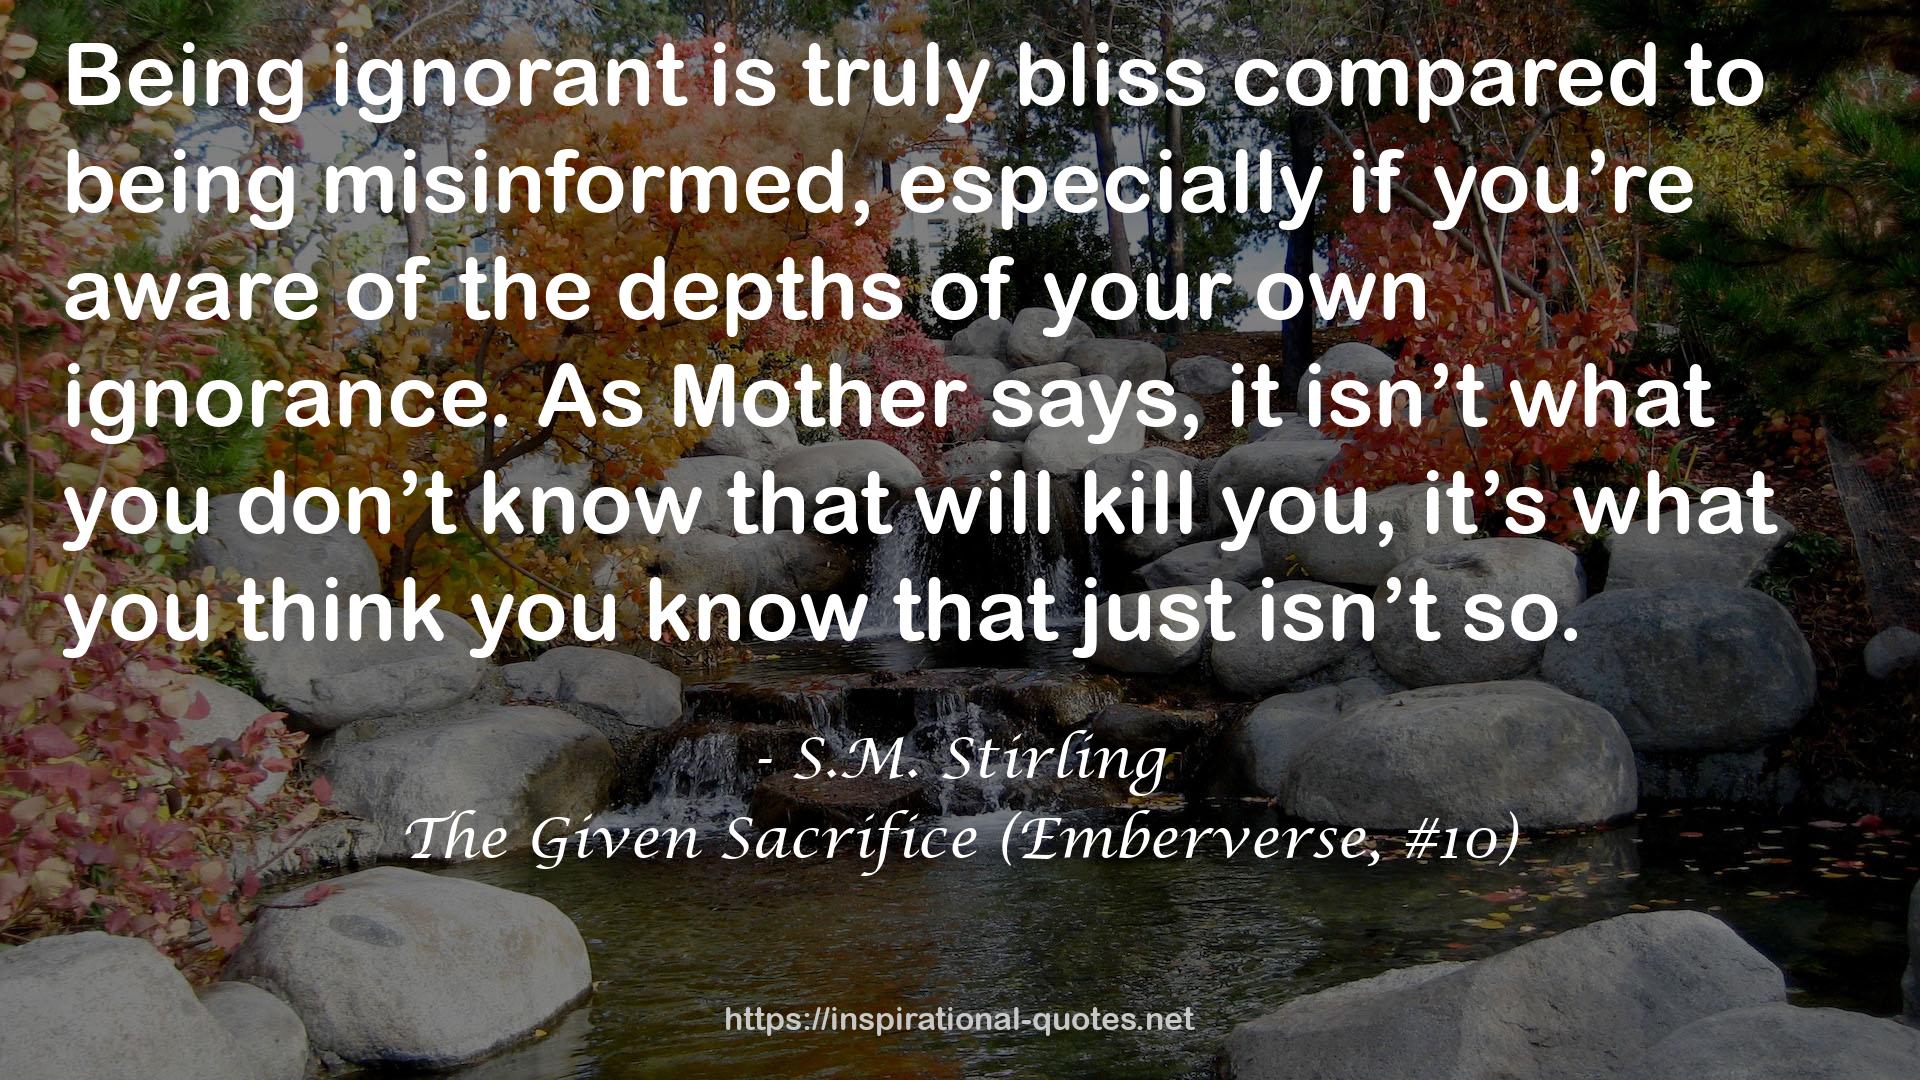 The Given Sacrifice (Emberverse, #10) QUOTES